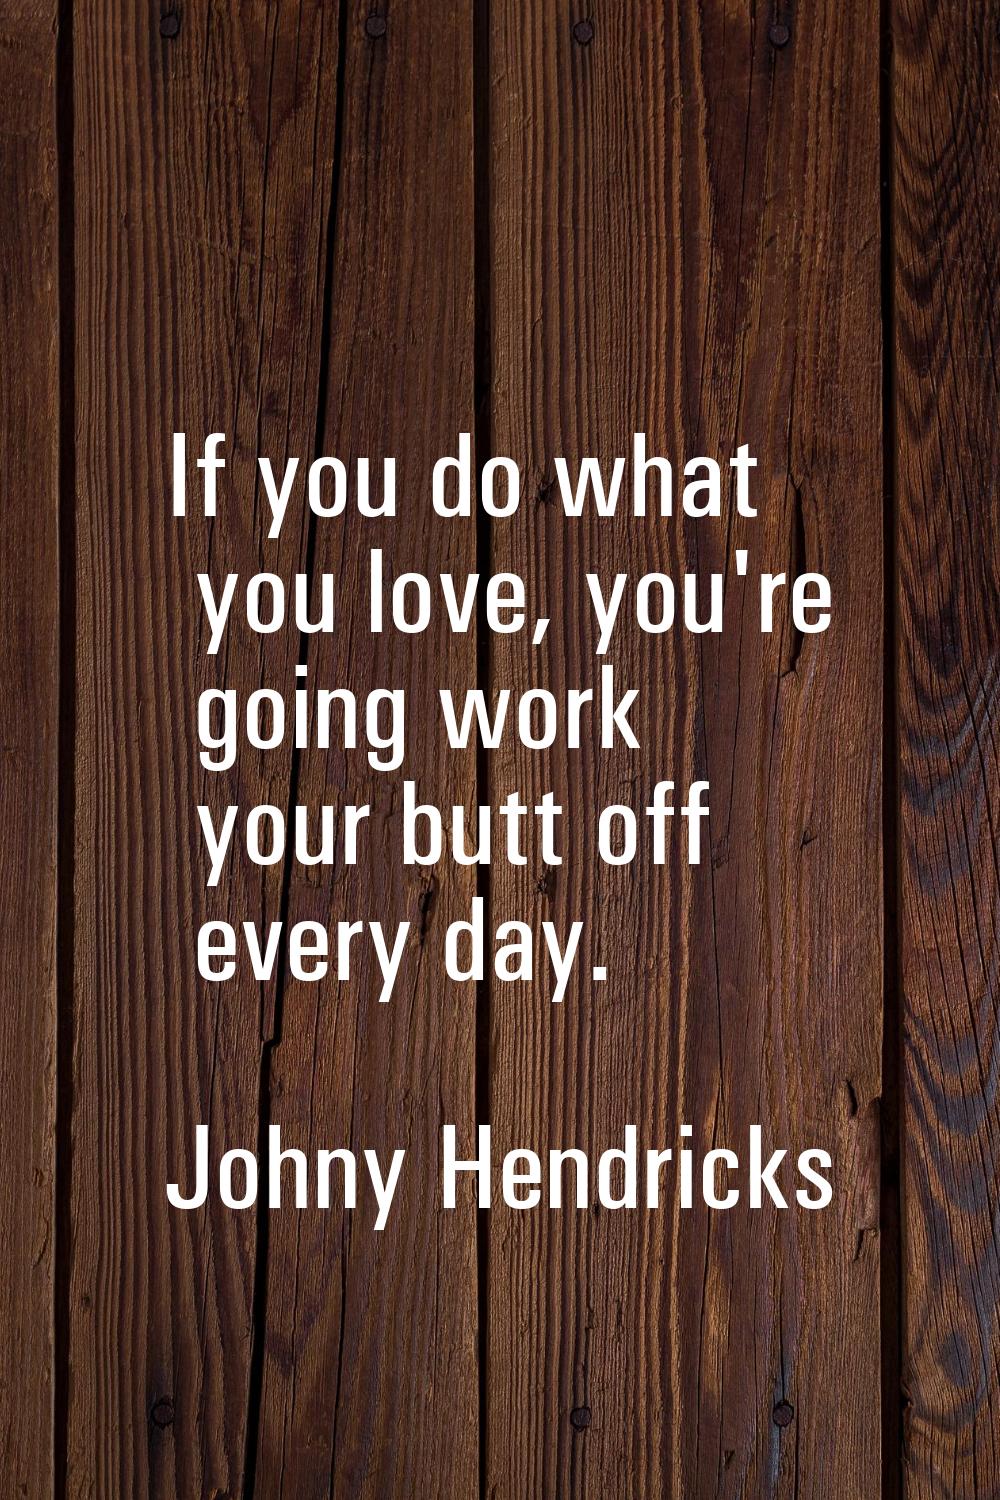 If you do what you love, you're going work your butt off every day.